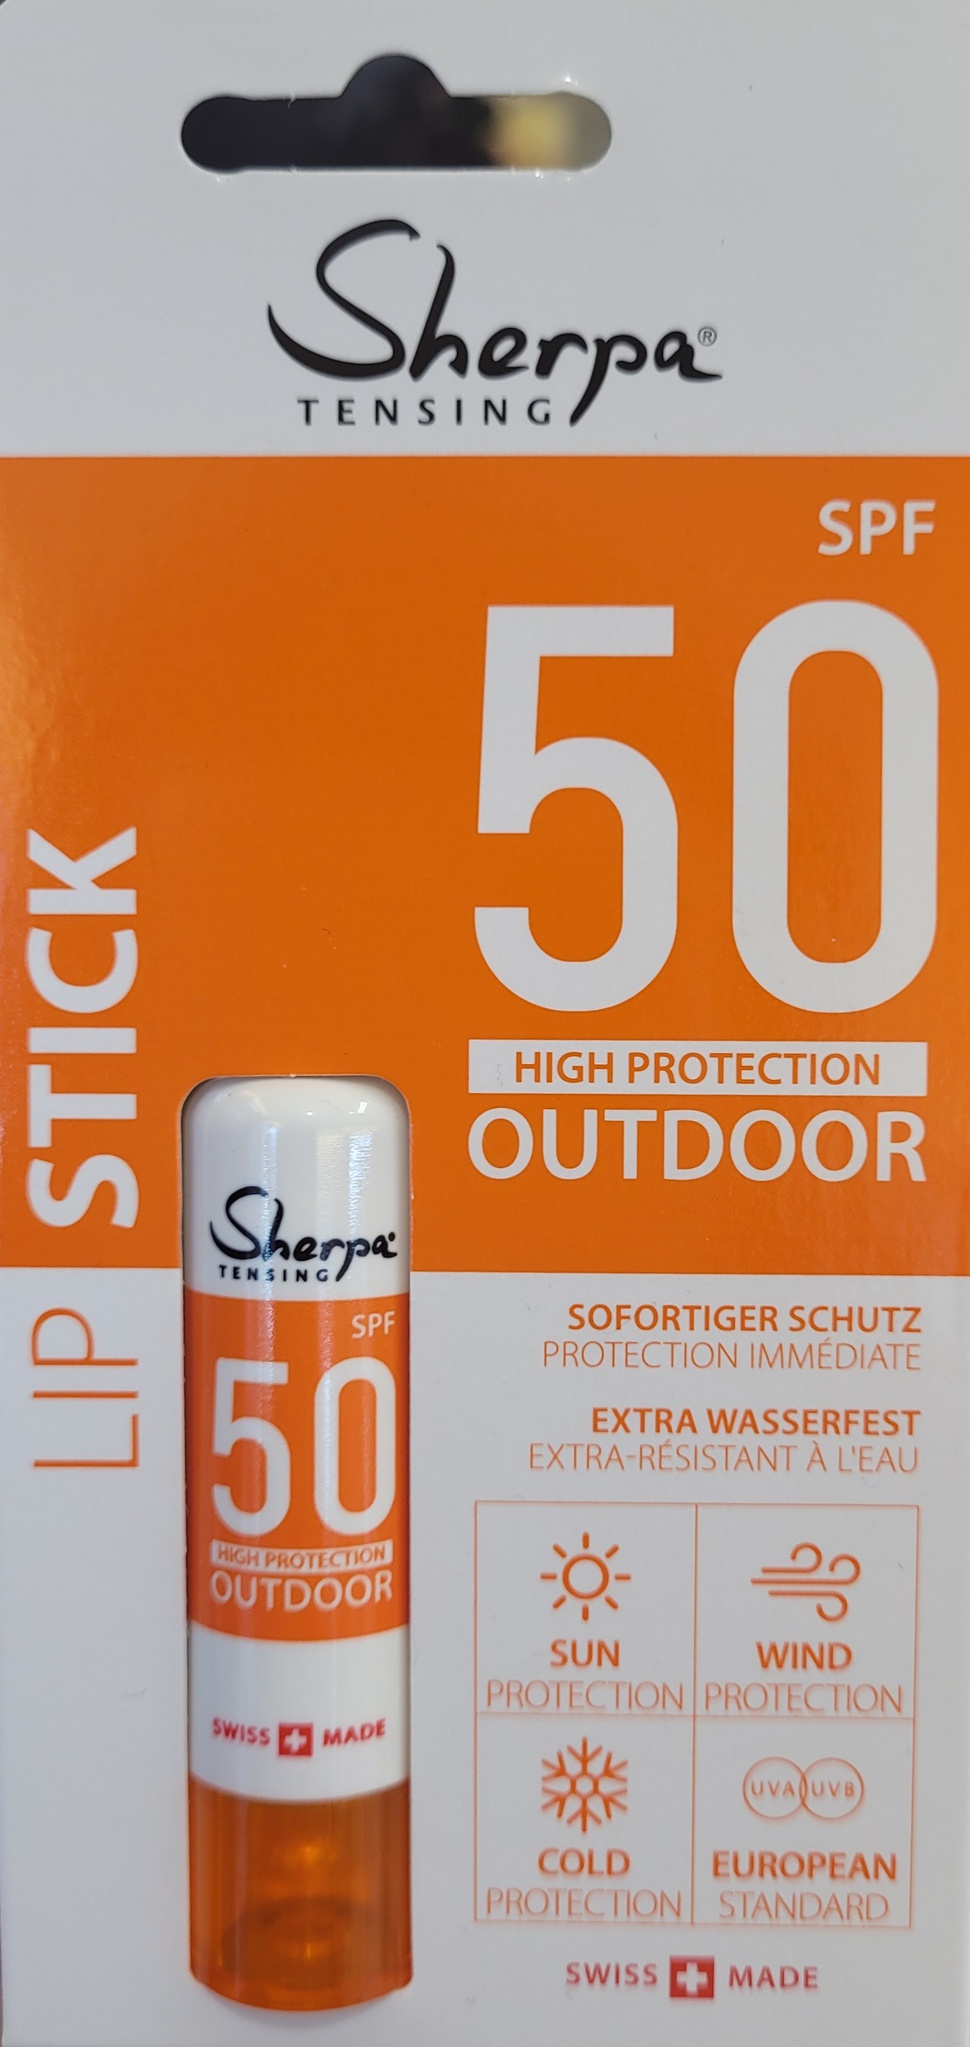 Sherpa High Protection Outdoor Lipstick 50SPF